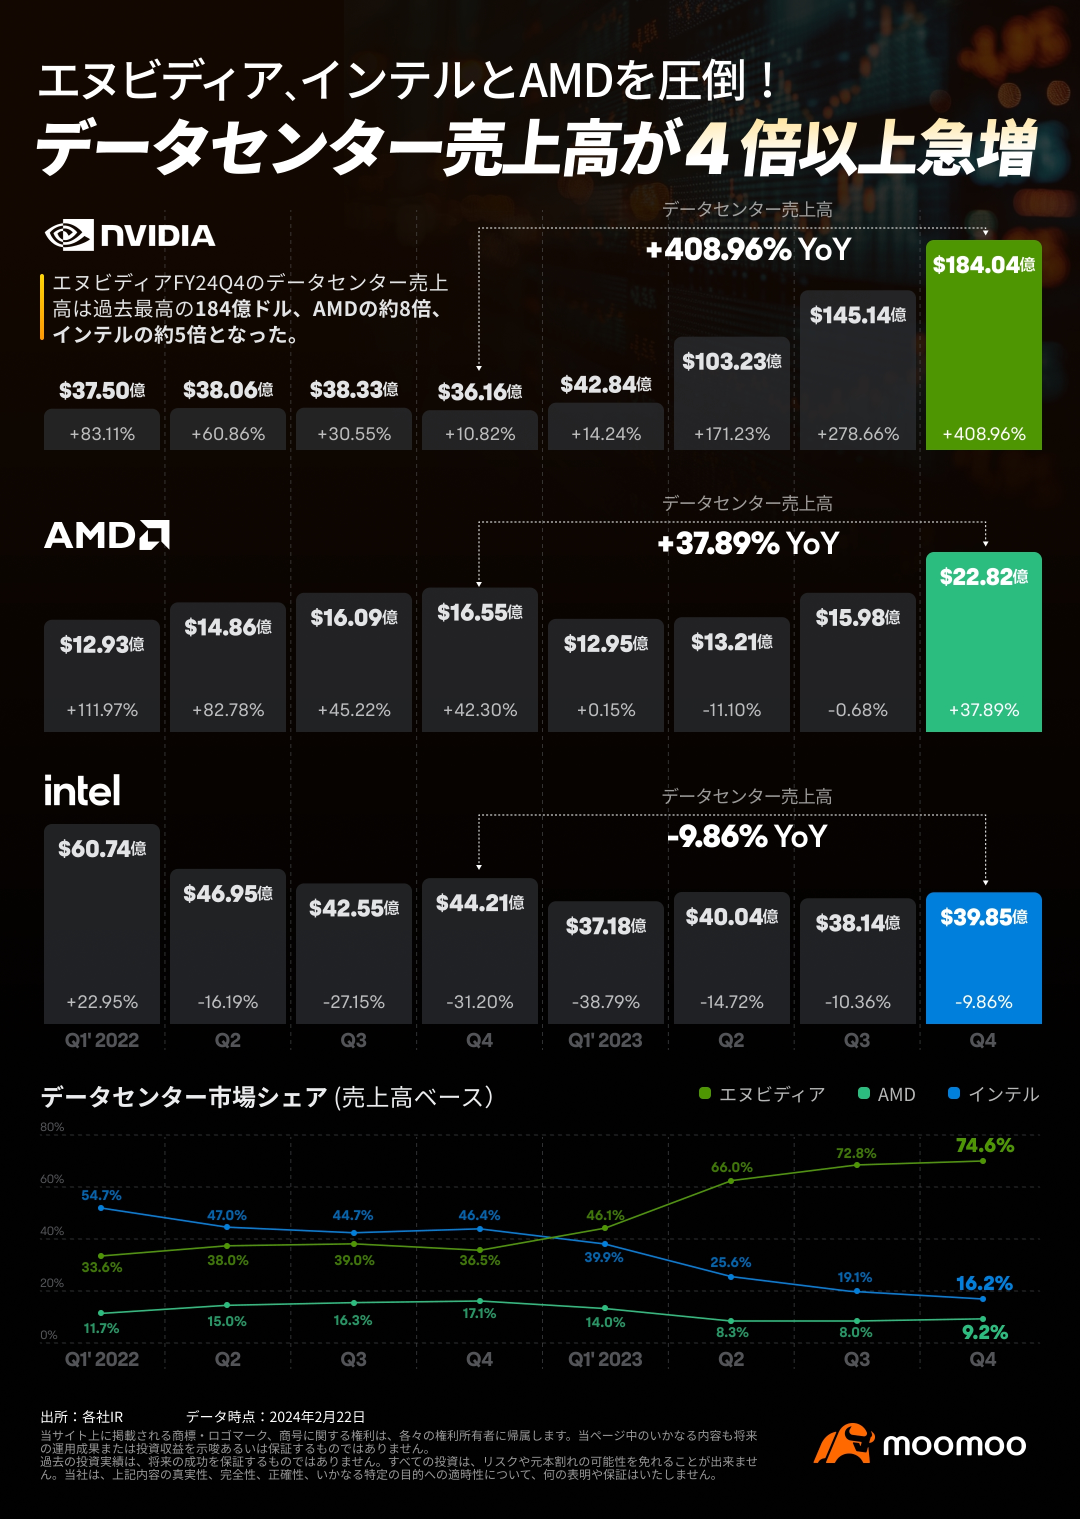 [Financial Summary] NVIDIA surged close to 13% at one point “Worldwide demand surges rapidly” = CEO Mr. Huang